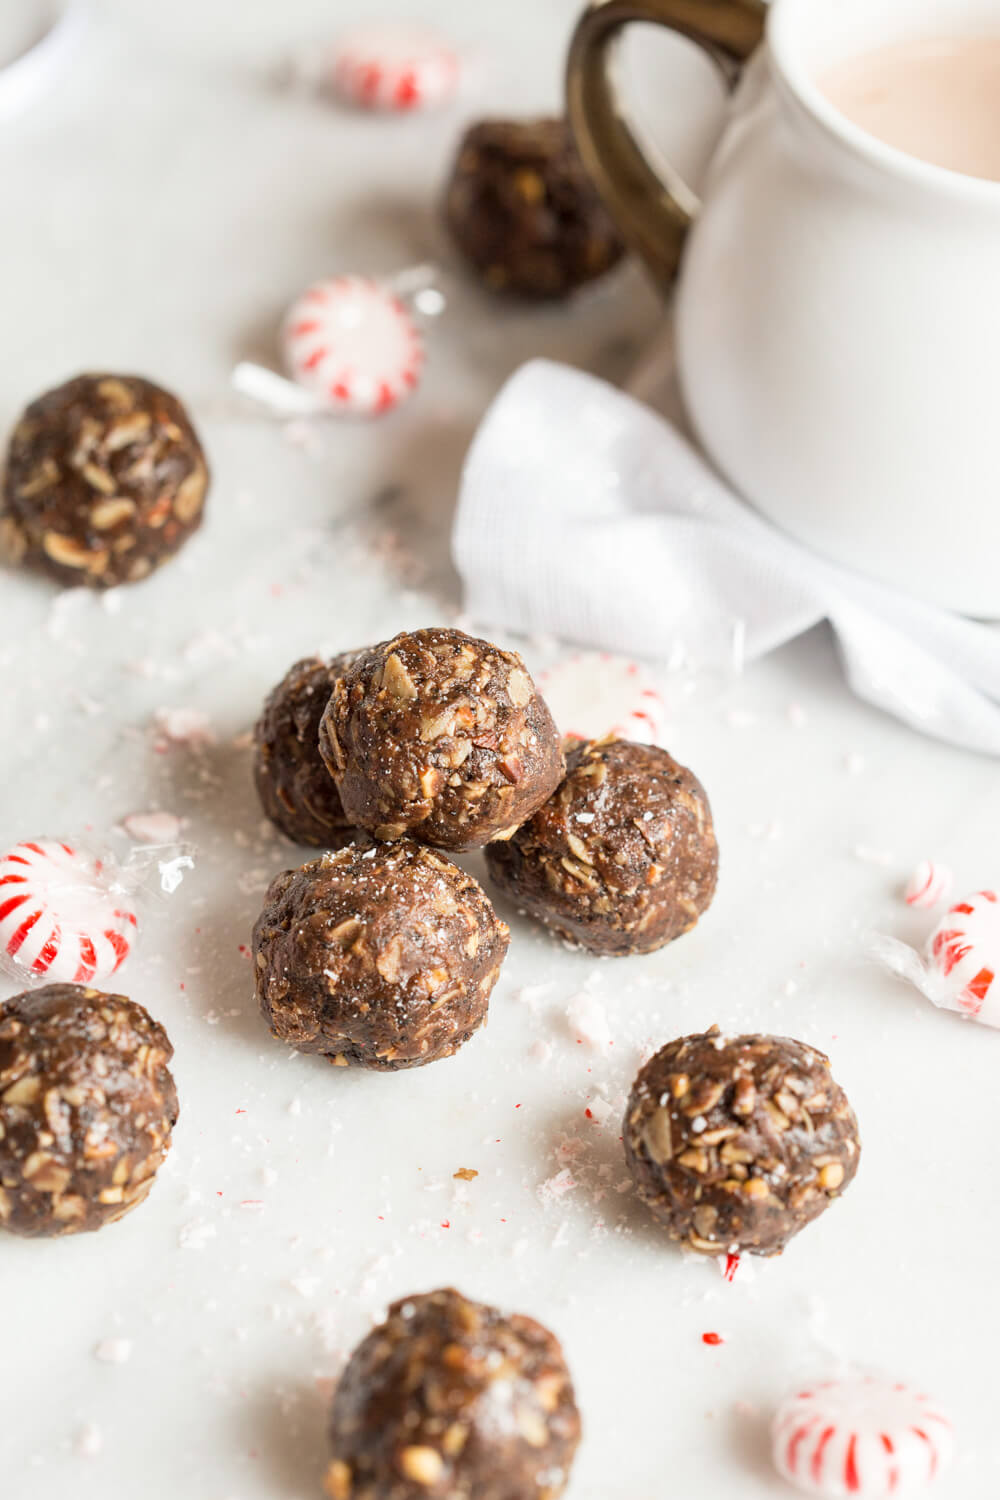 These Peppermint Mocha Energy Bites made with almond butter, oats, and ground coffee are sooo easy to prepare-- all you need is a big bowl and mixing spoon. They make the perfect snack for traveling during the holidays!